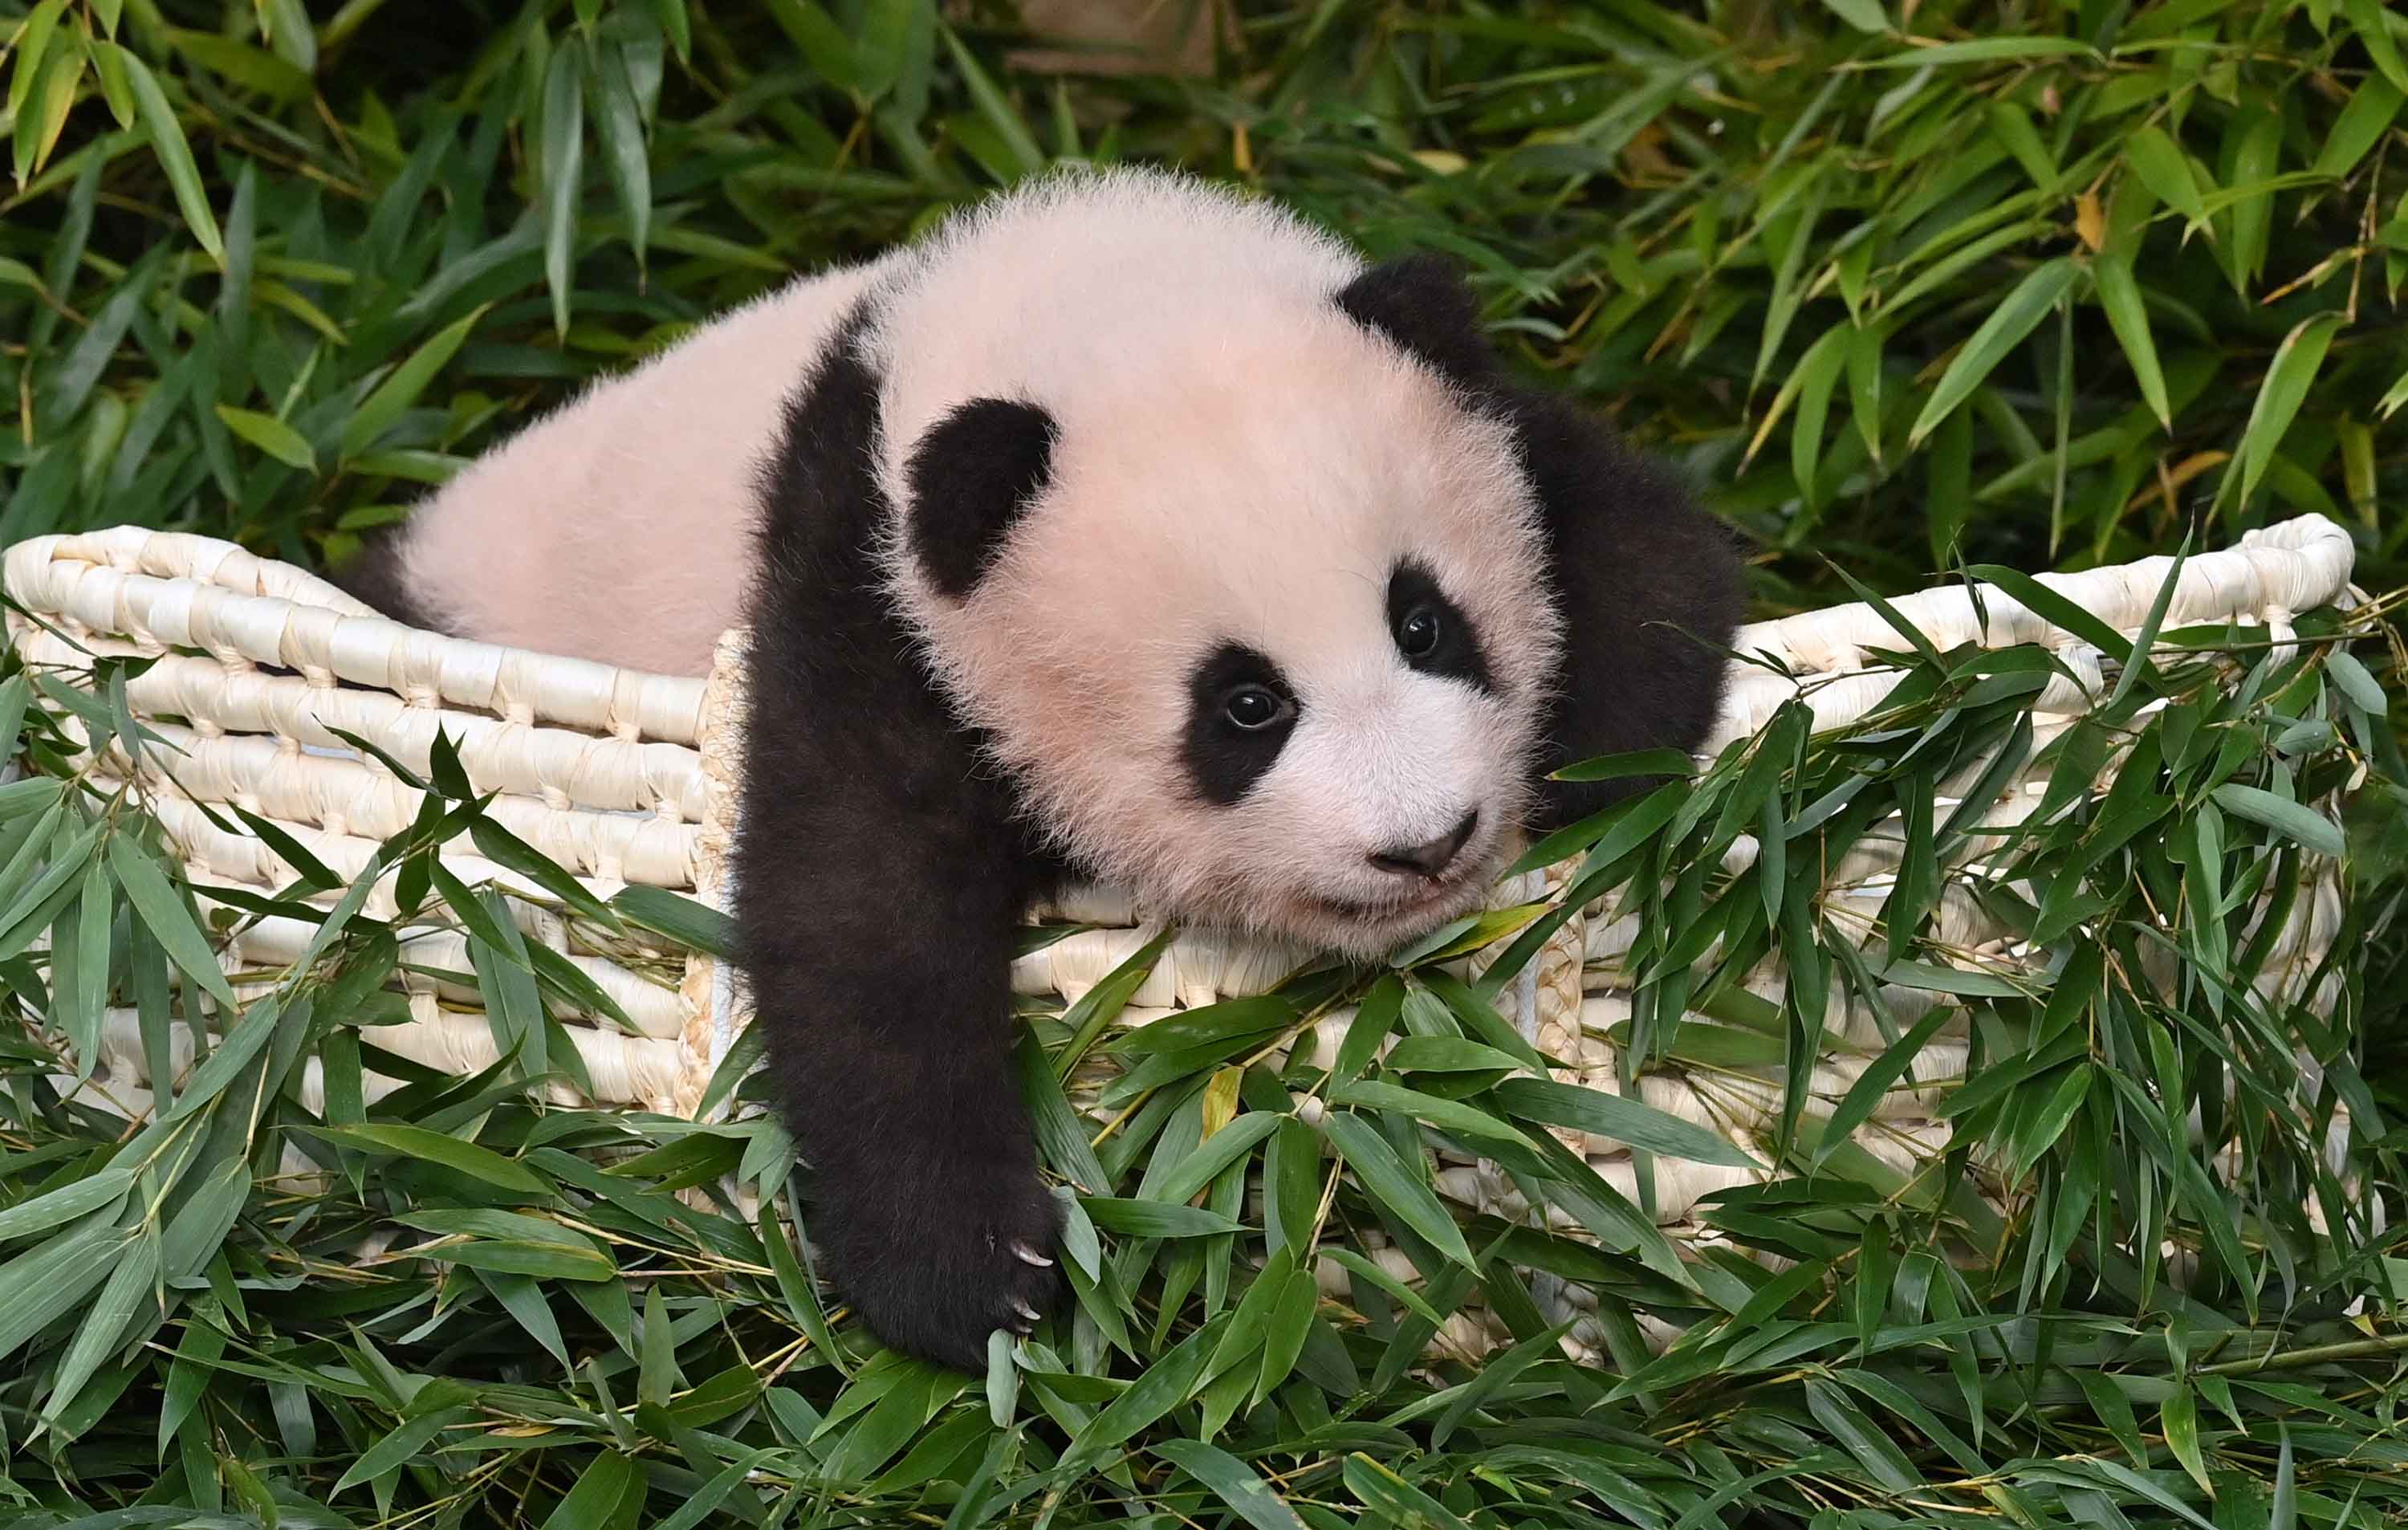 Blackpink's video with giant panda cub sparks outrage in China | CNN